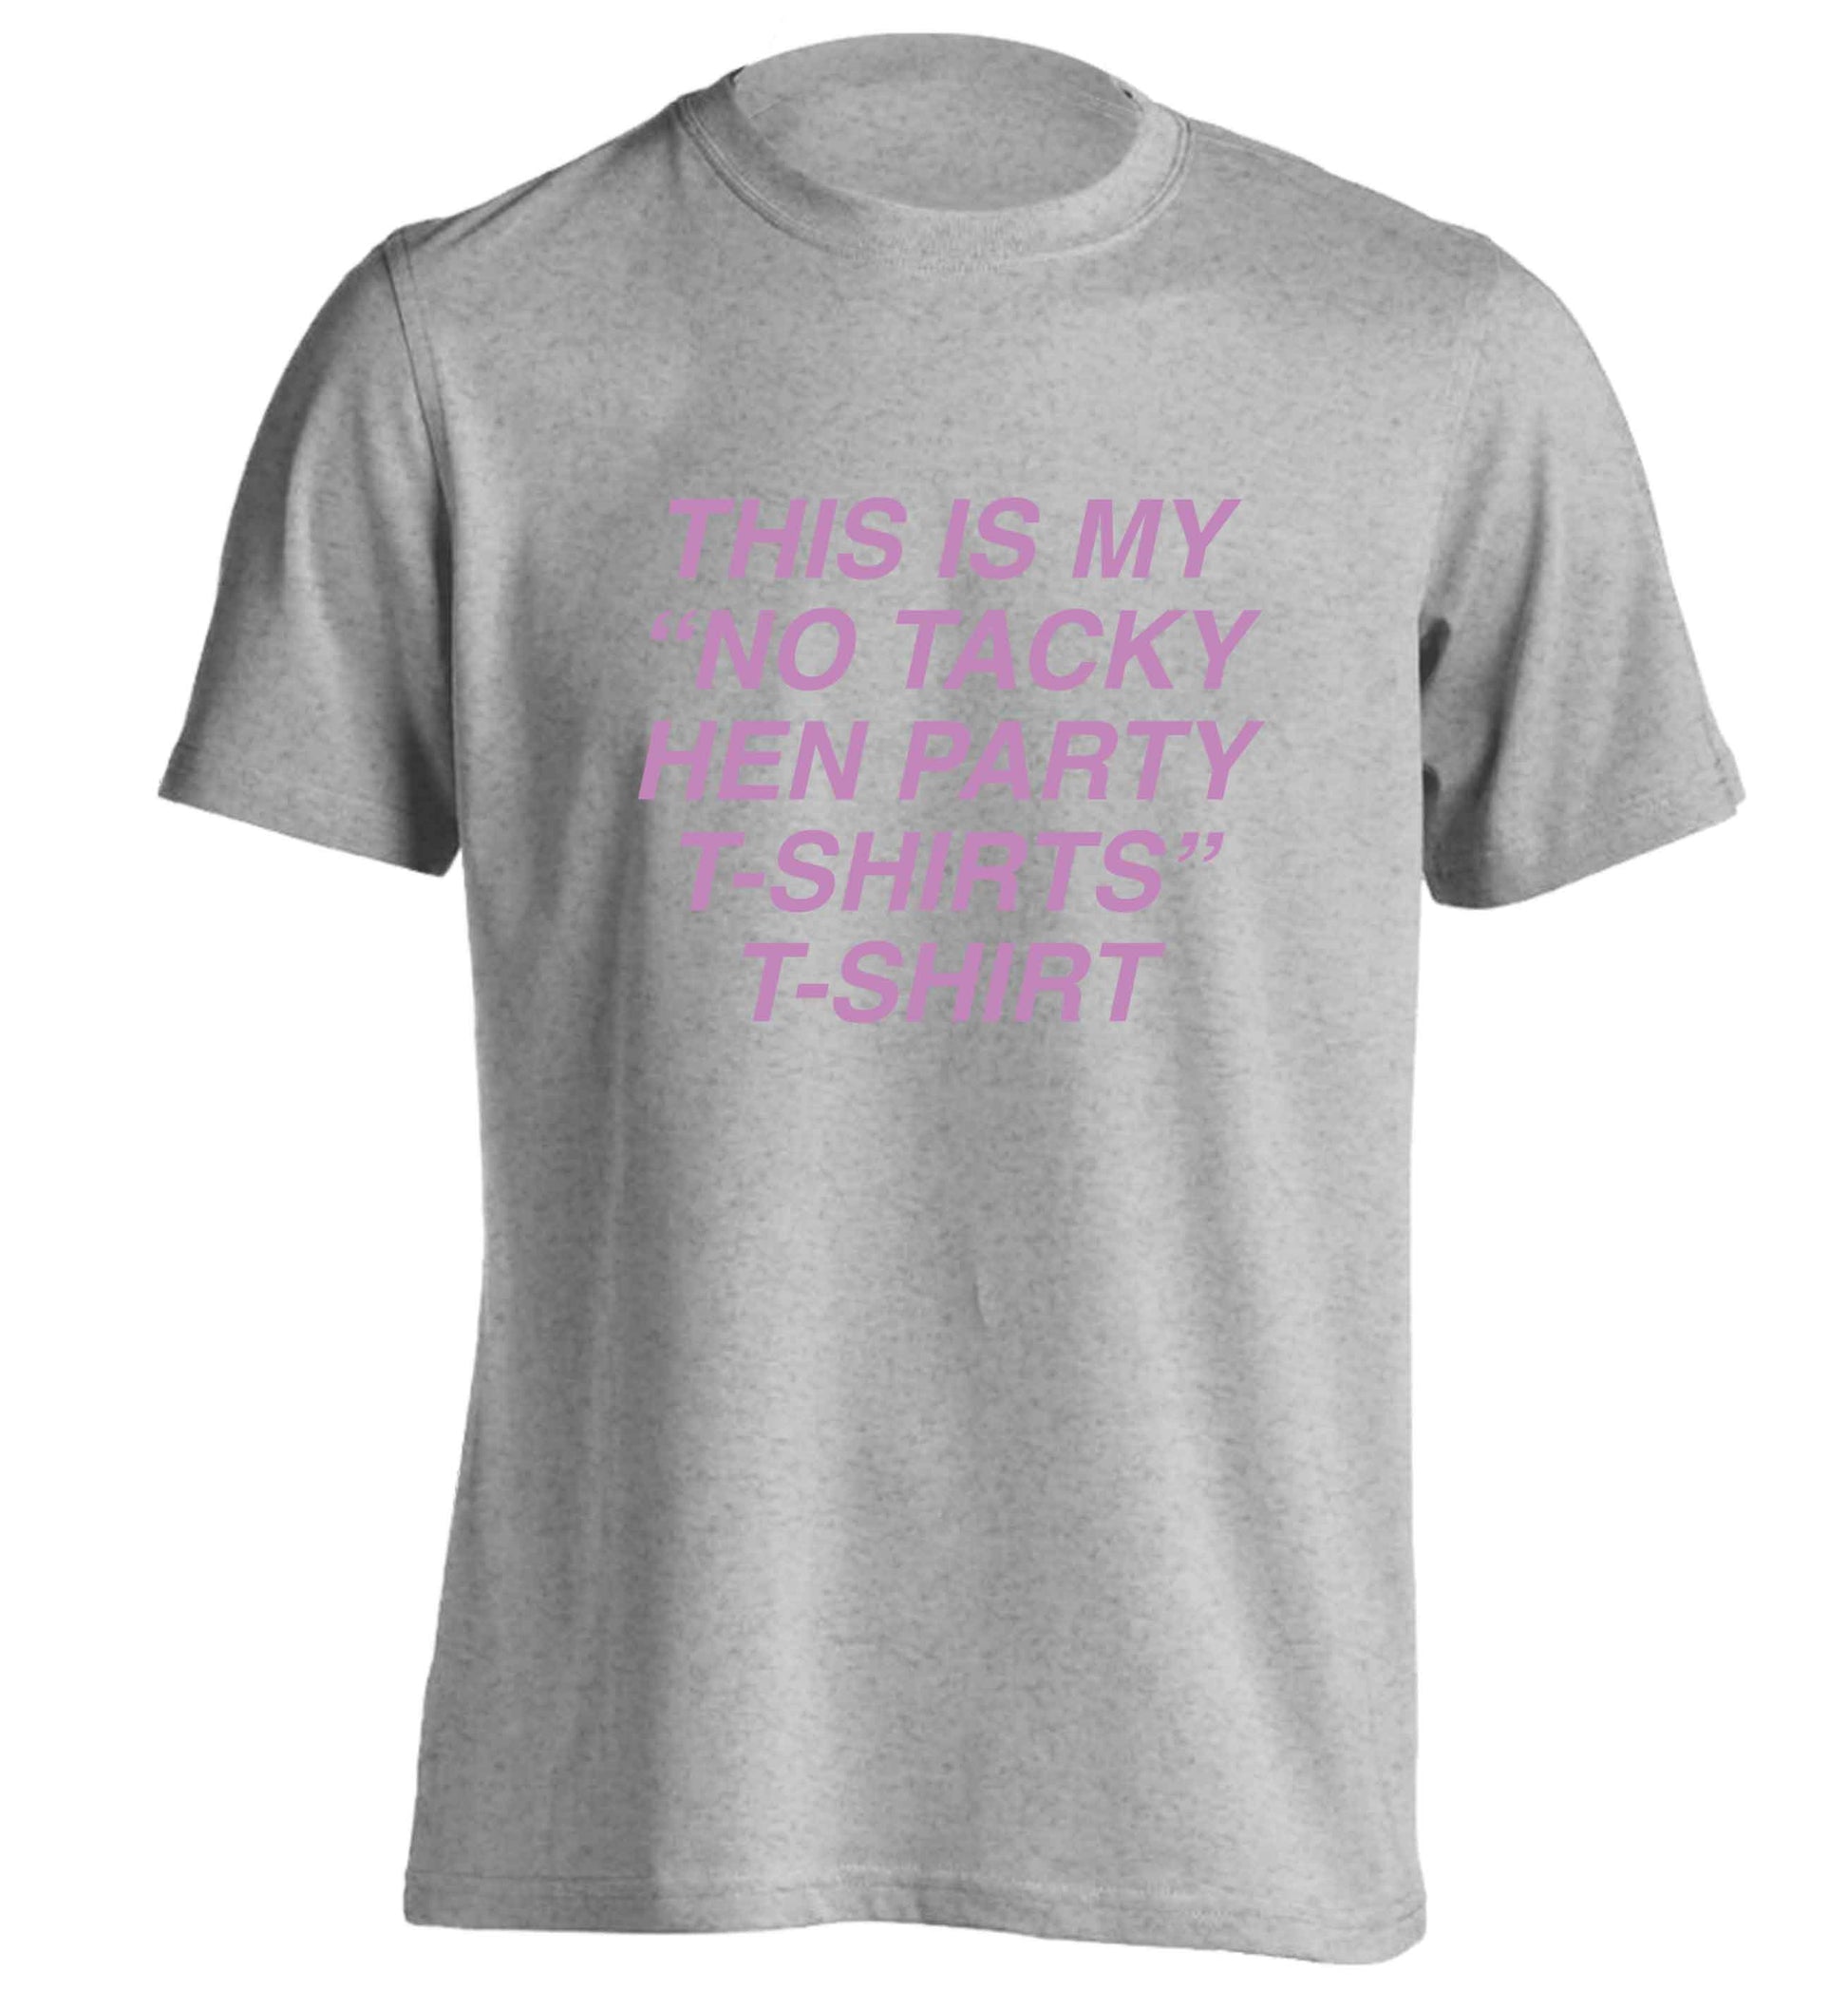 This is my 'no tacky hen party T-Shirt'  adults unisex grey Tshirt 2XL